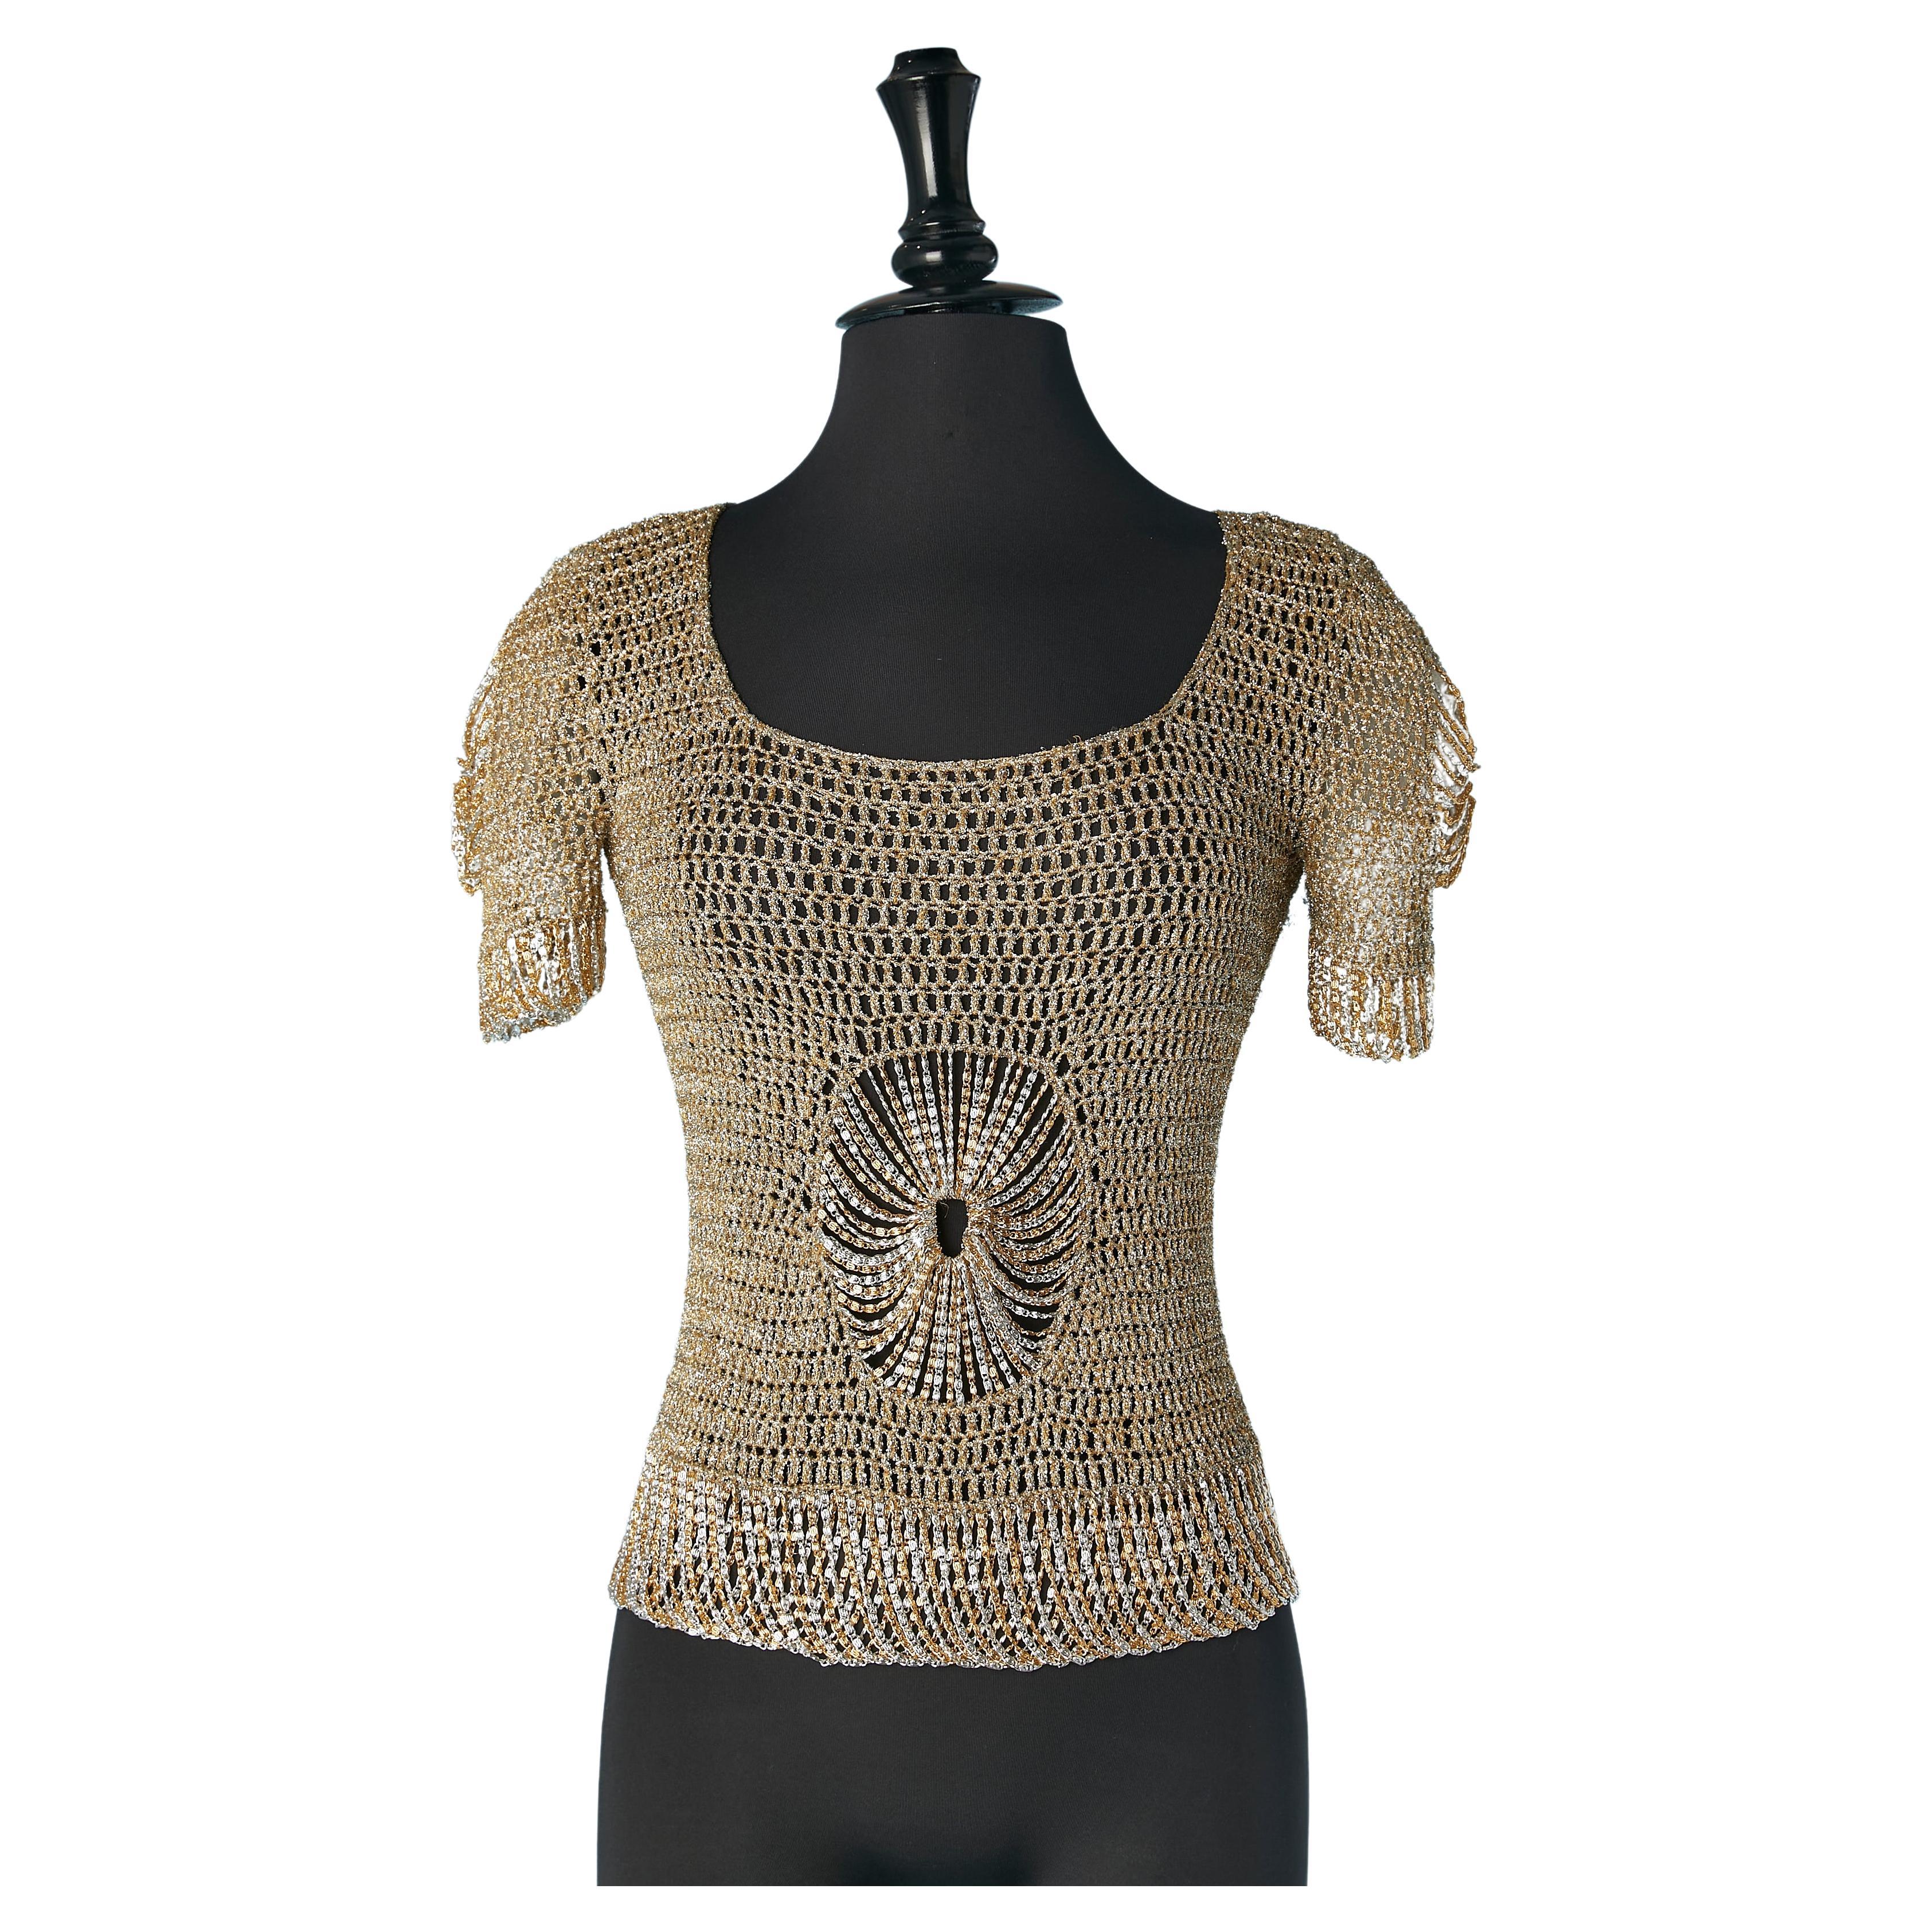 Iconic gold and silver lurex knit sweater with metallic chains Loris Azzaro  For Sale